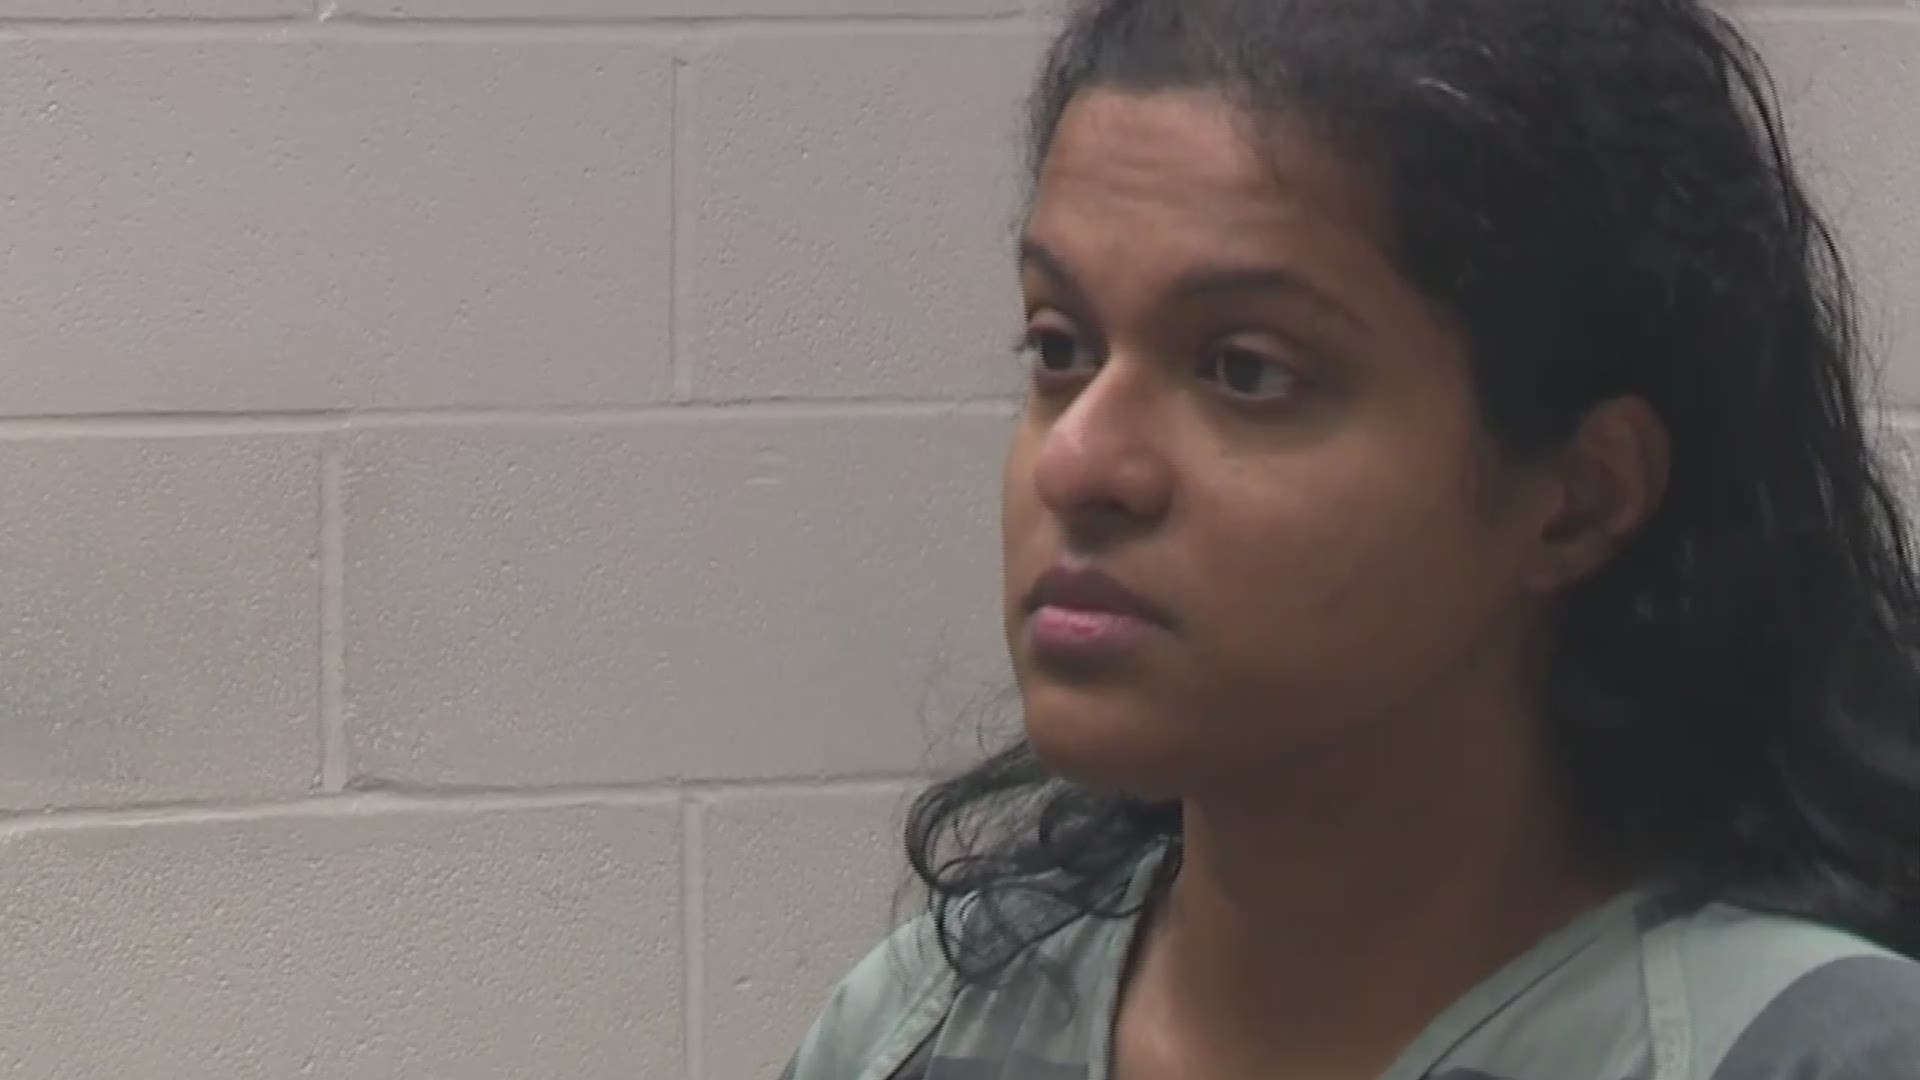 Sini Mathews appears before a judge to hear the charges brought against her.